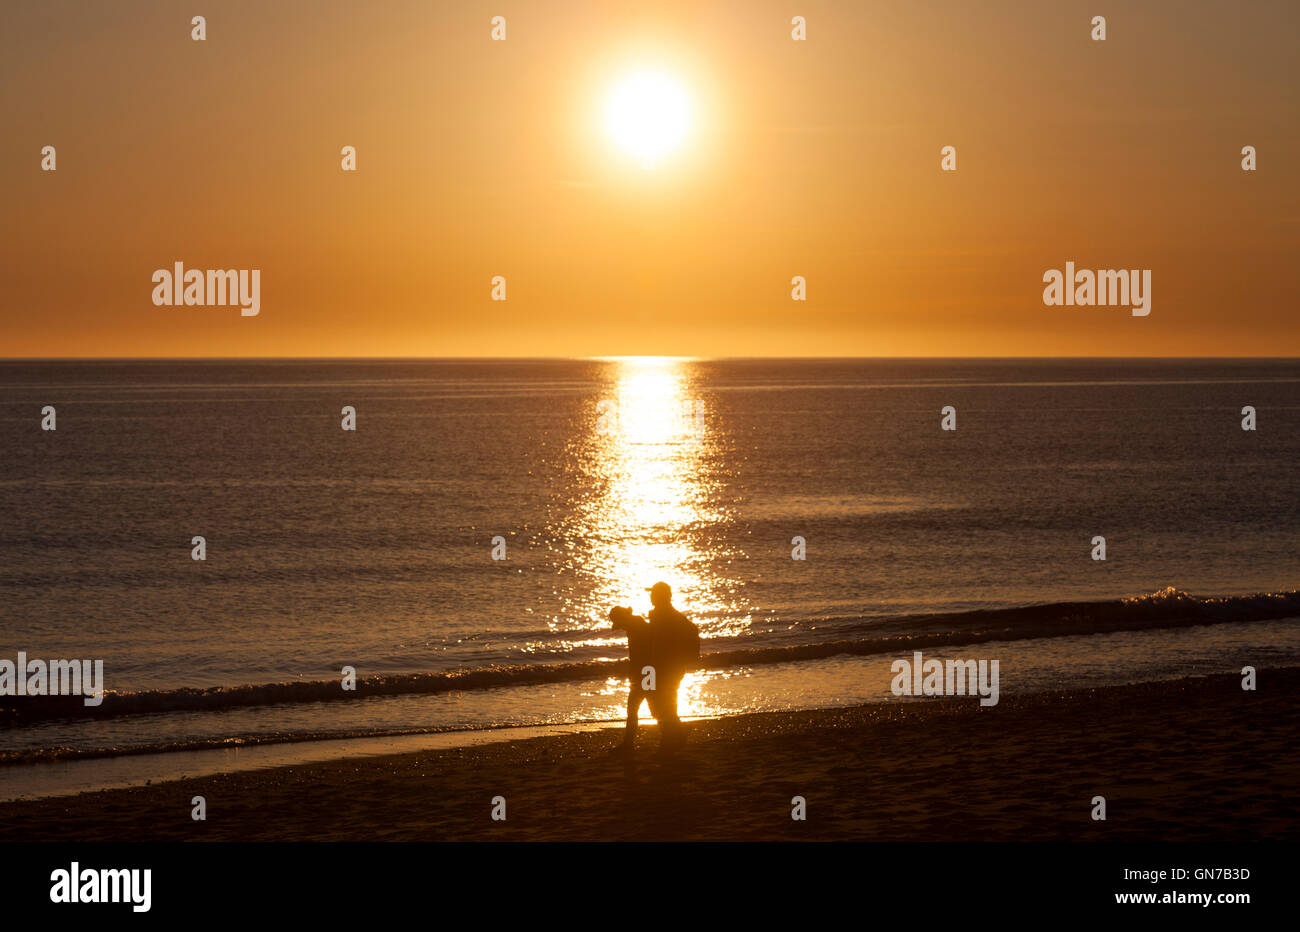 A sunset on the ocean and a silhouette of 2 people walking on the beach. Stock Photo